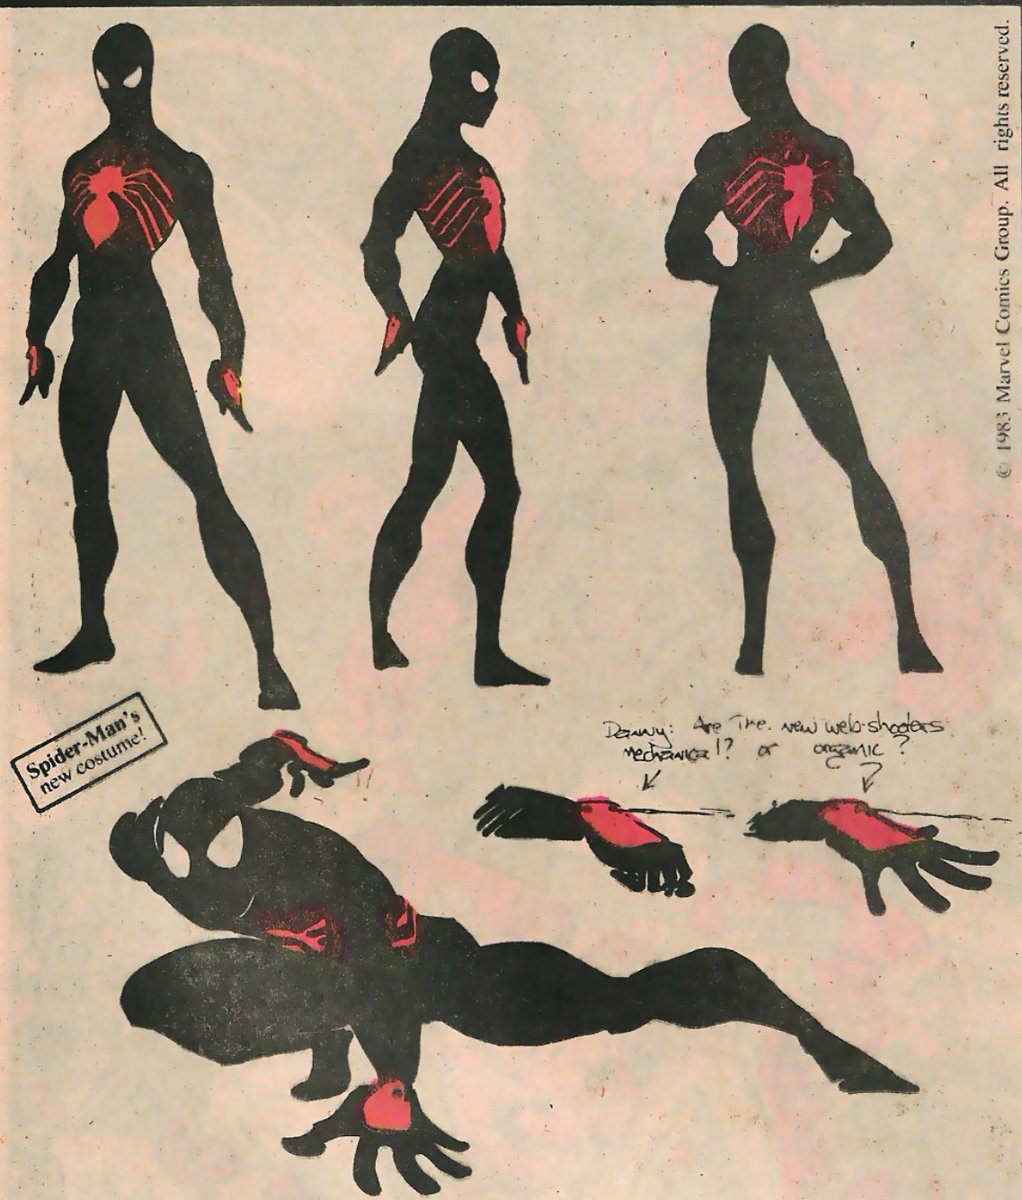 but let's skip ahead to the 80's, Venom's genesis began when a fan sent in an idea for a new Spider-man costume, it was later modified into the classic black costume, it was a controversial but still rather well liked costume at the time.